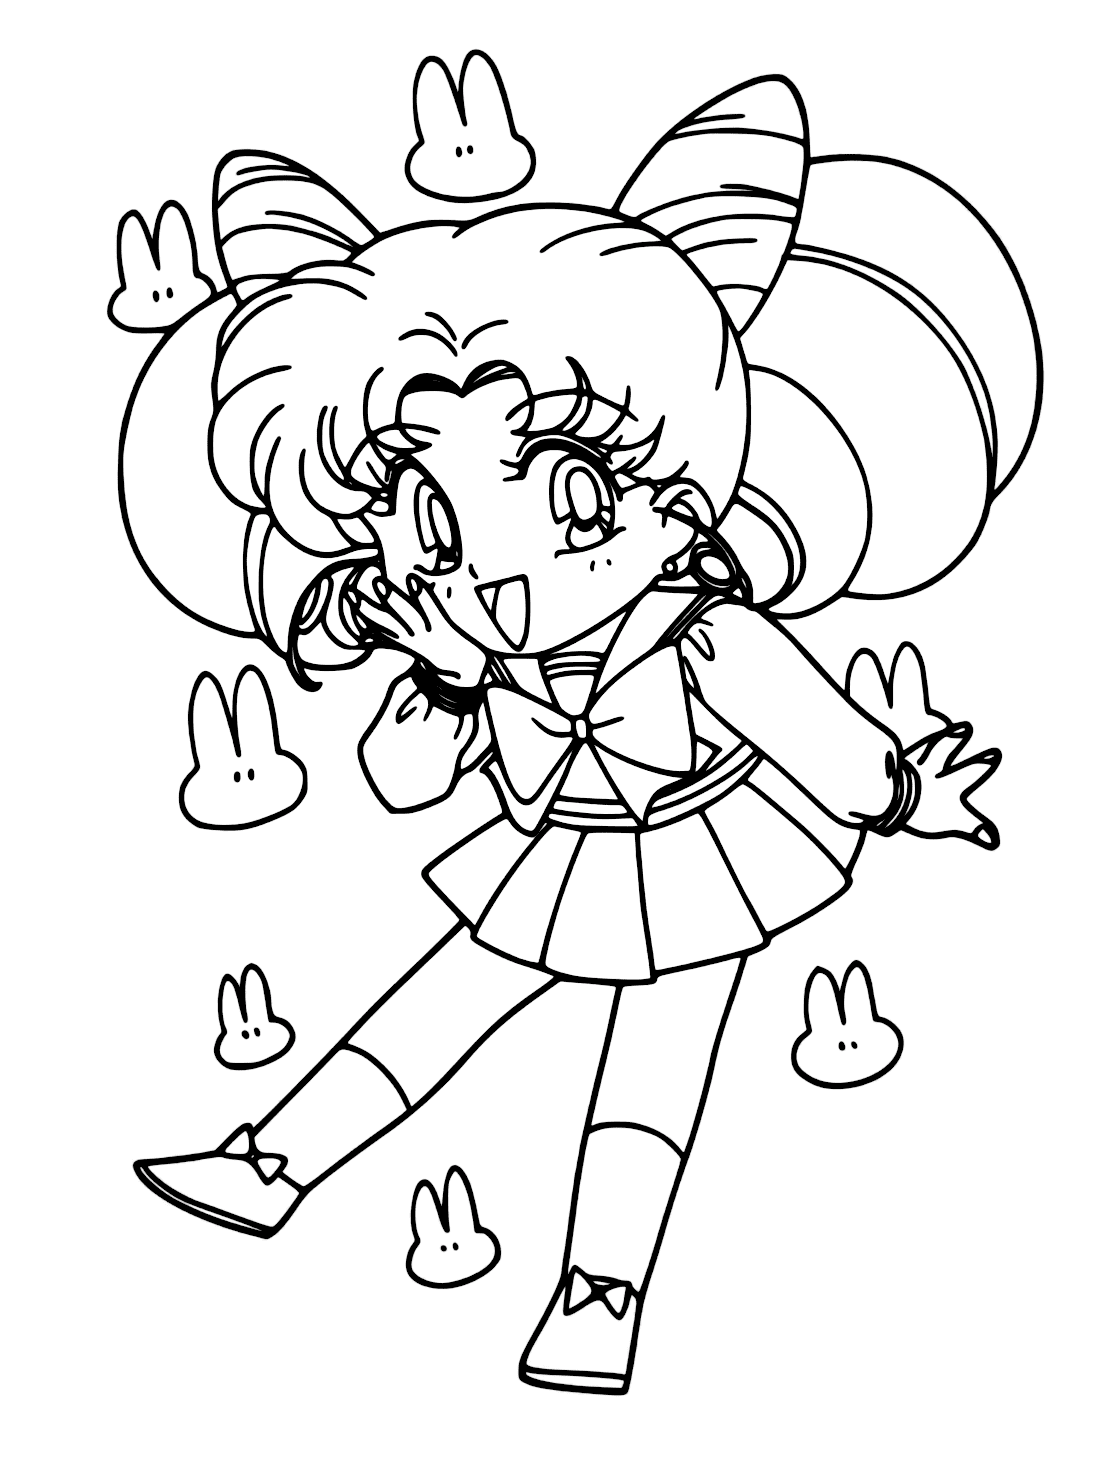 Sailor Moon Coloring Pages to Print